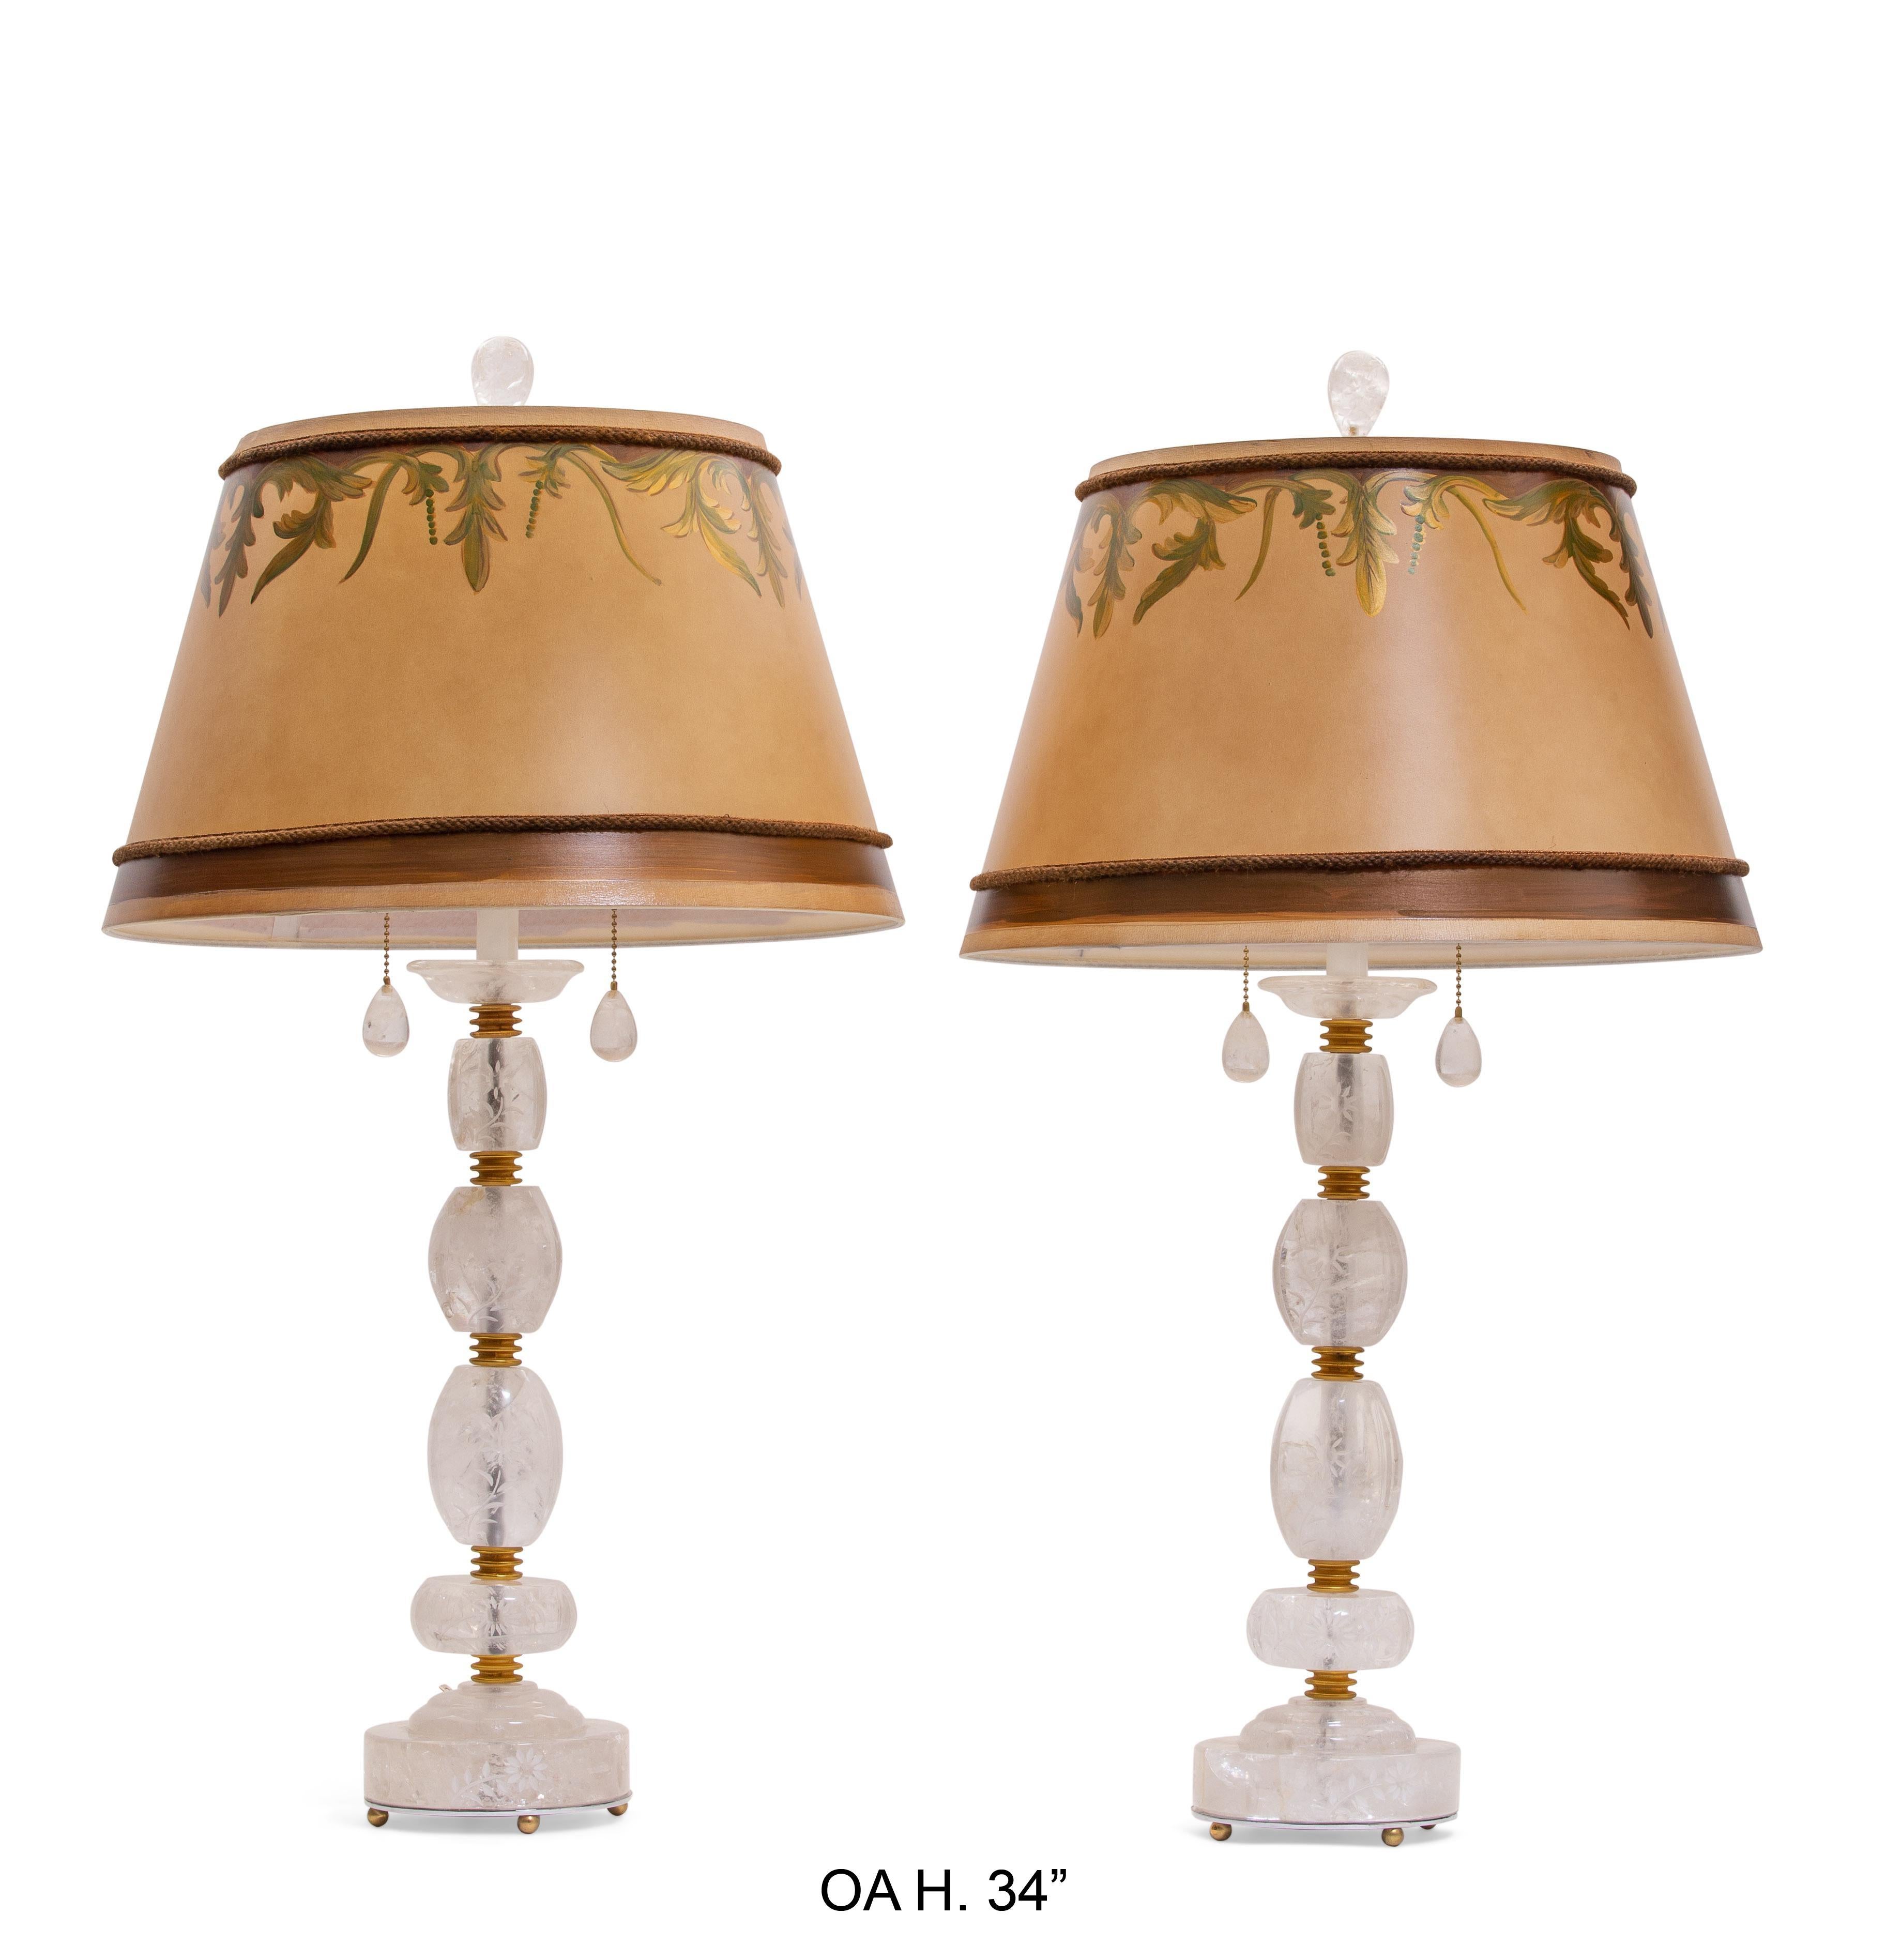 Magnificent and unique pair of engraved rock crystal table lamps.
Rock Crystal is one of the hardest gem stones, the only way to be engraved is by using diamond tools, that is what makes engraving Rock Crystal is almost impossible therefore makes